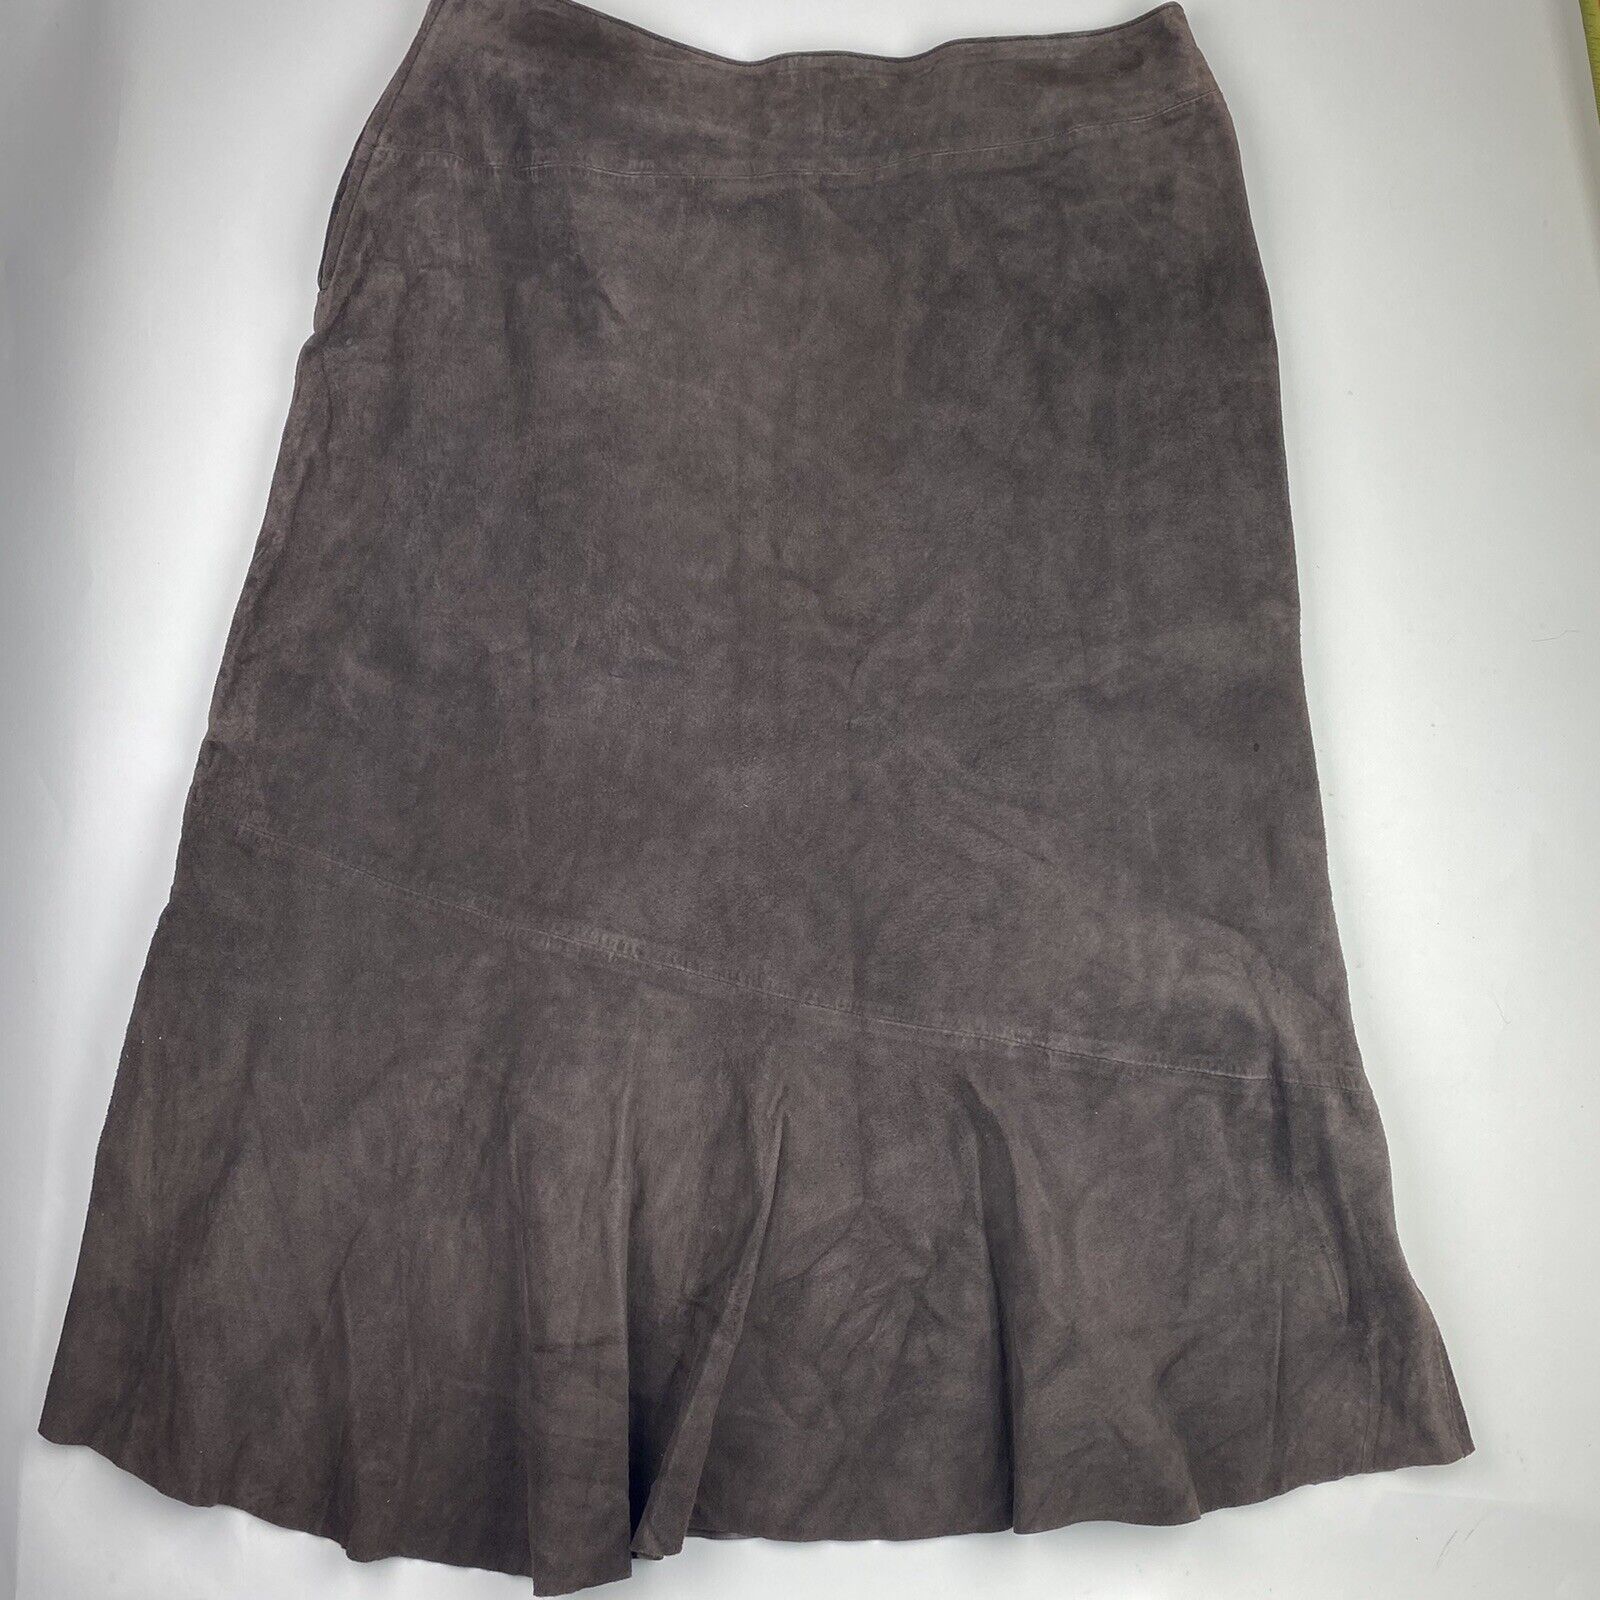 Provence D’Amour Skirt Sz 10 Brown Leather Suede … - image 11